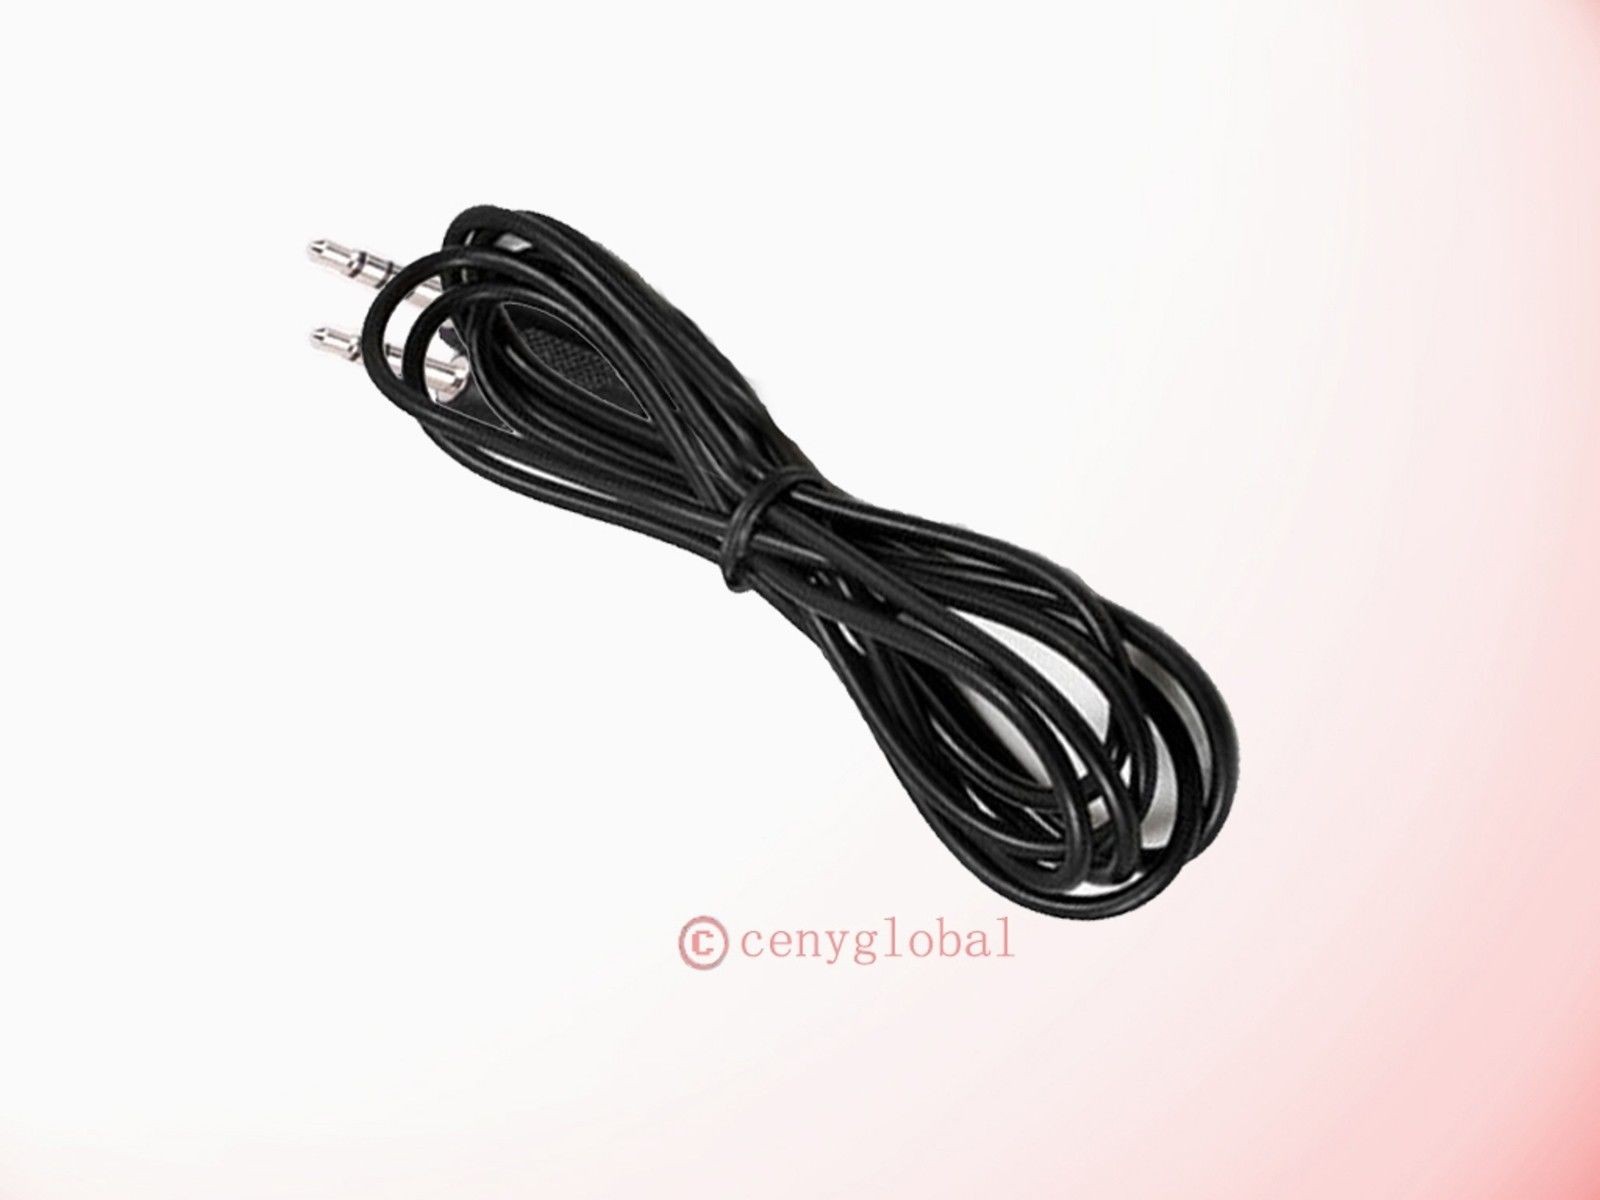 Cloning Cable Ma-500tr | Icom MA-500TR Support